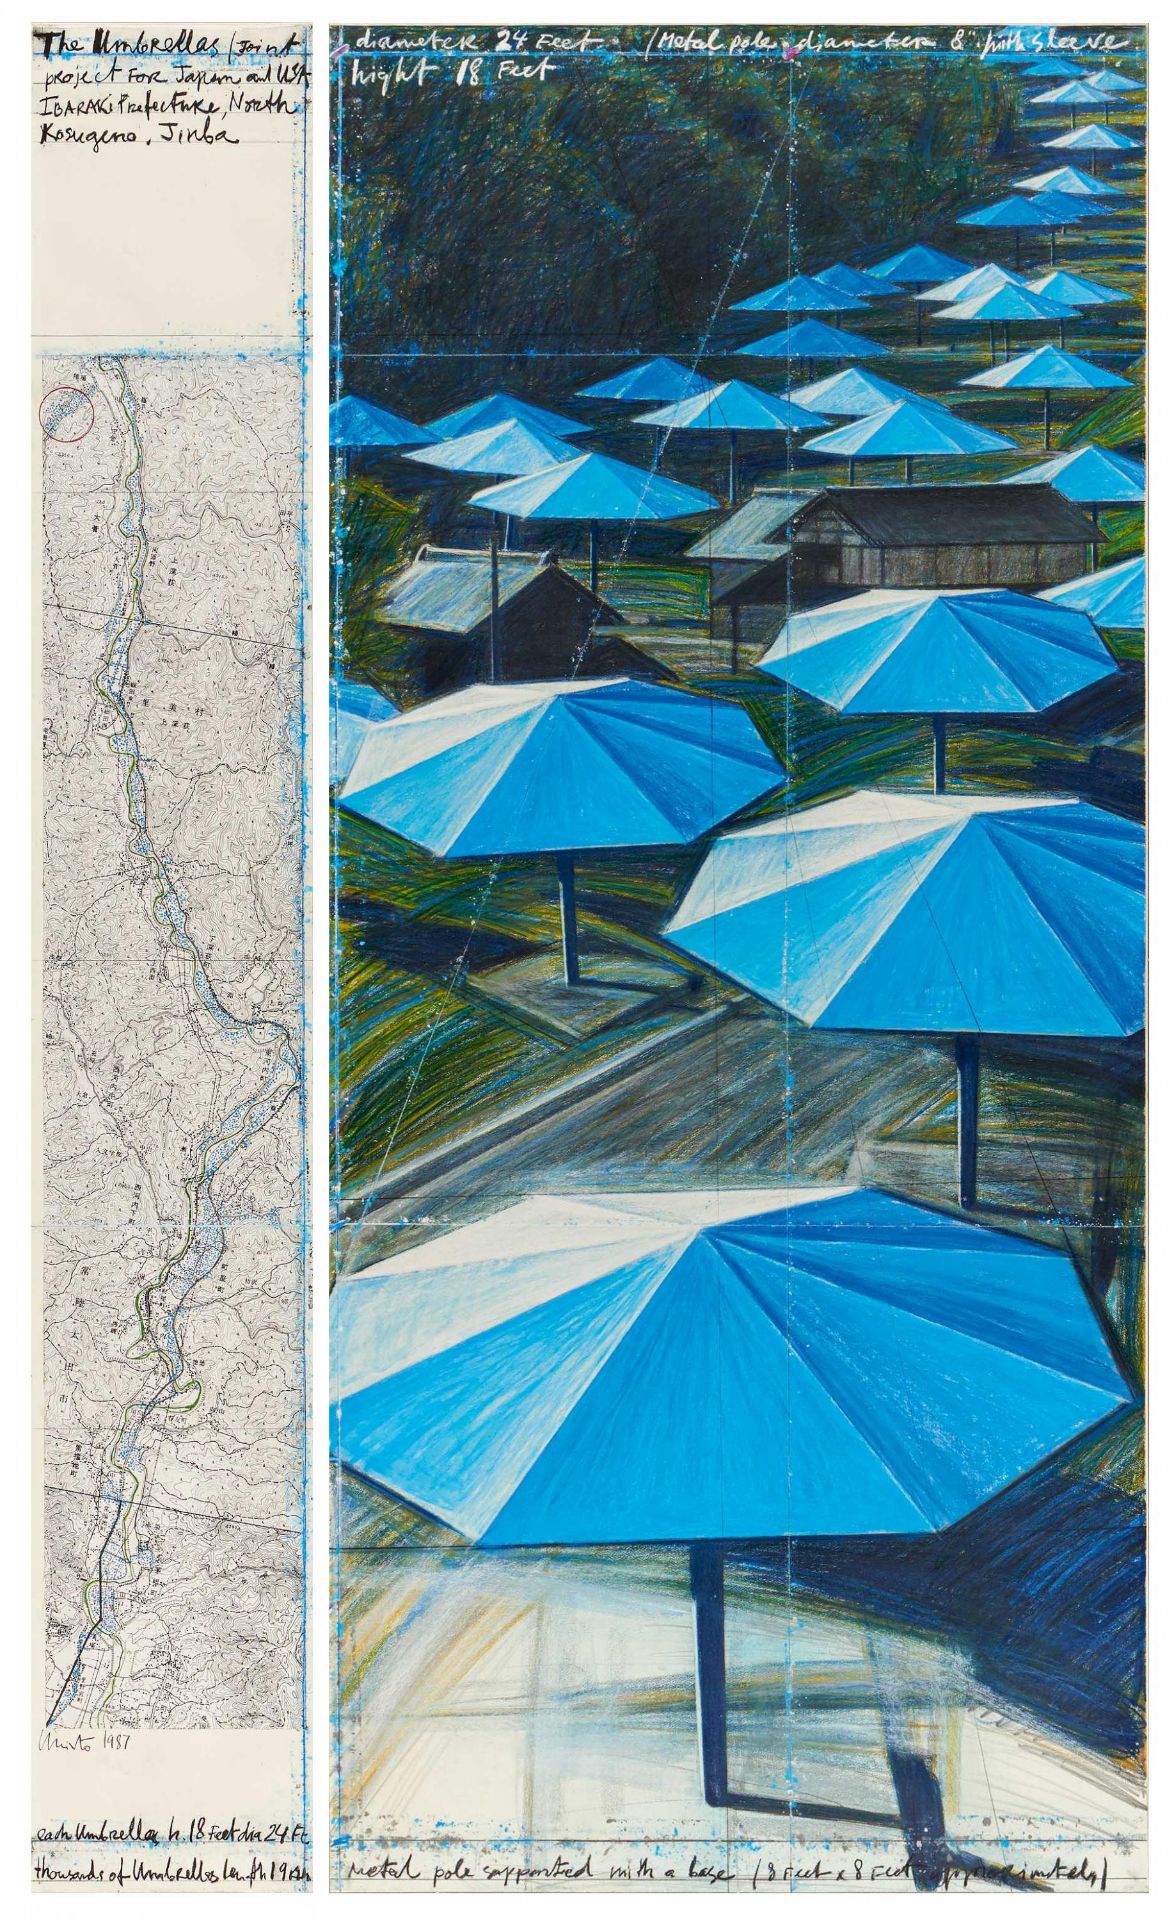 Christo: The Umbrellas (Joint Project for Japan and USA)